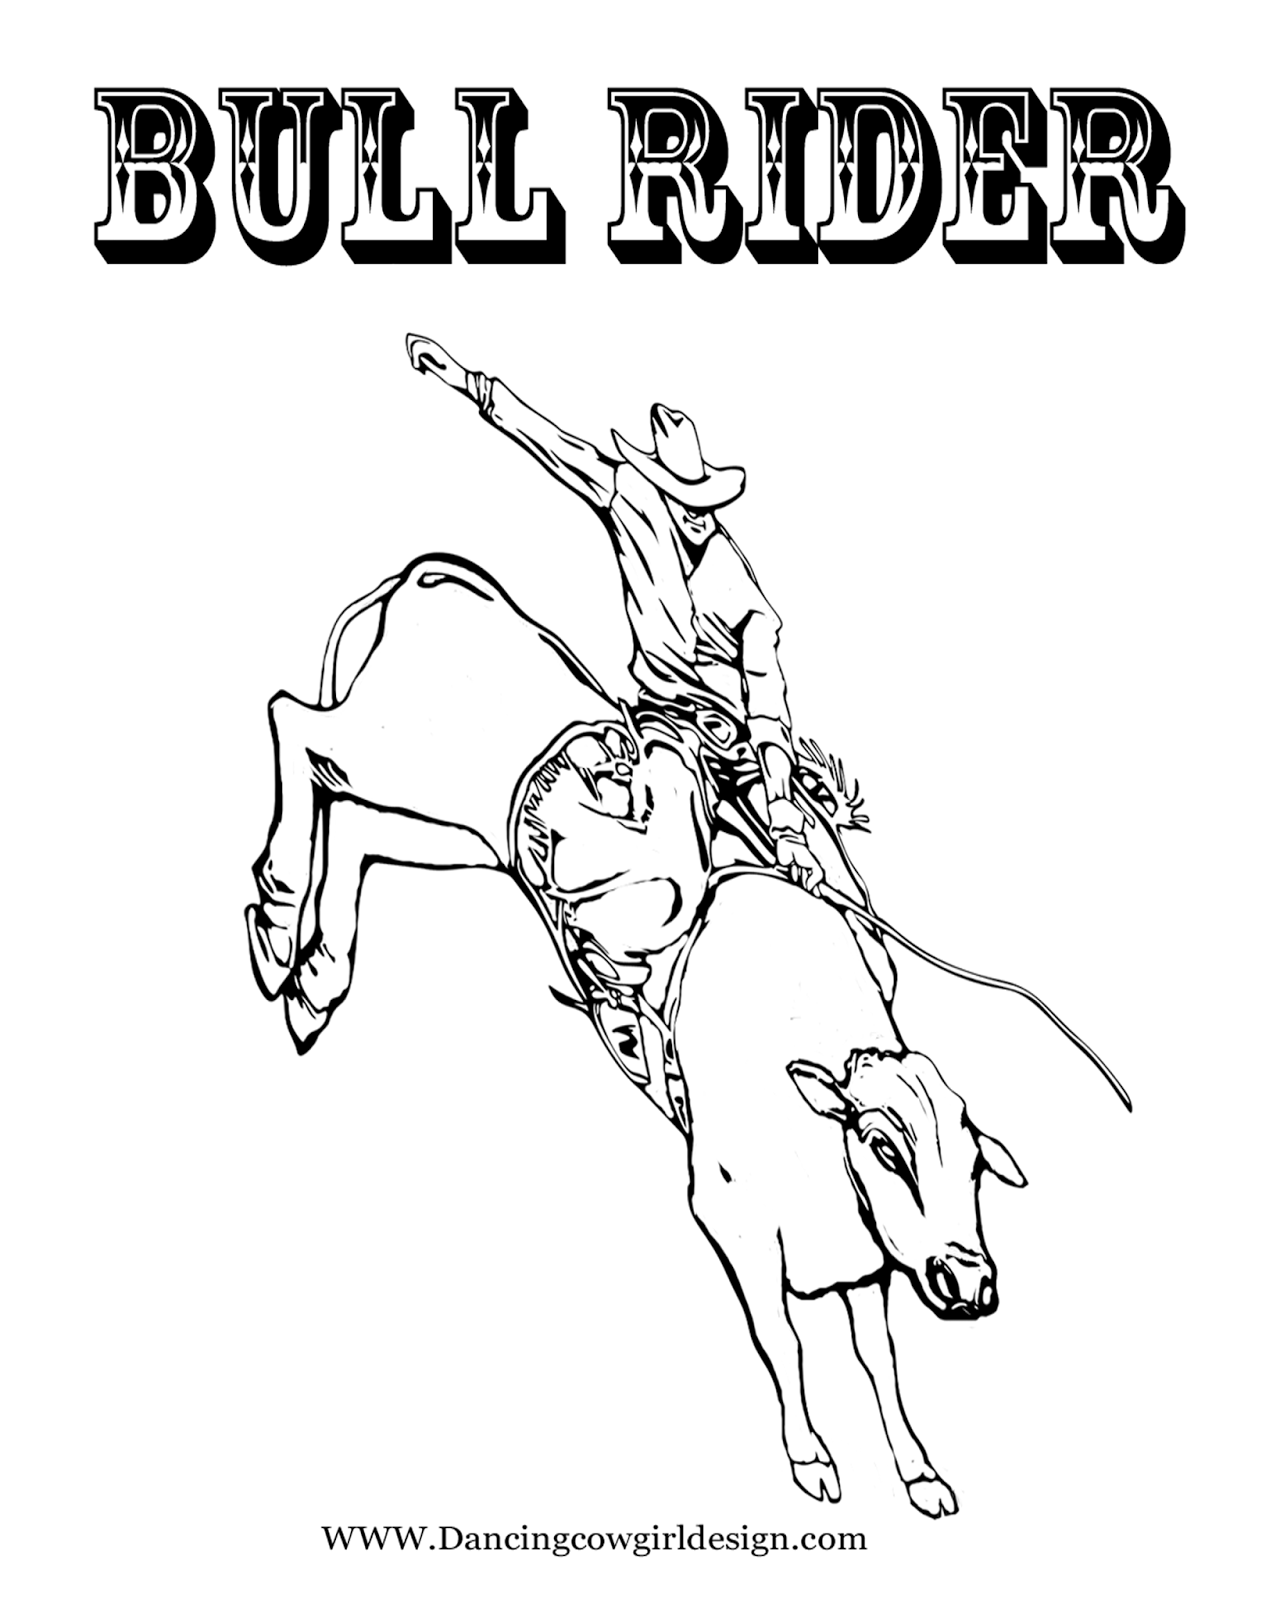 Rodeo Coloring Pages Preschool – Rodeo coloring pages colorings